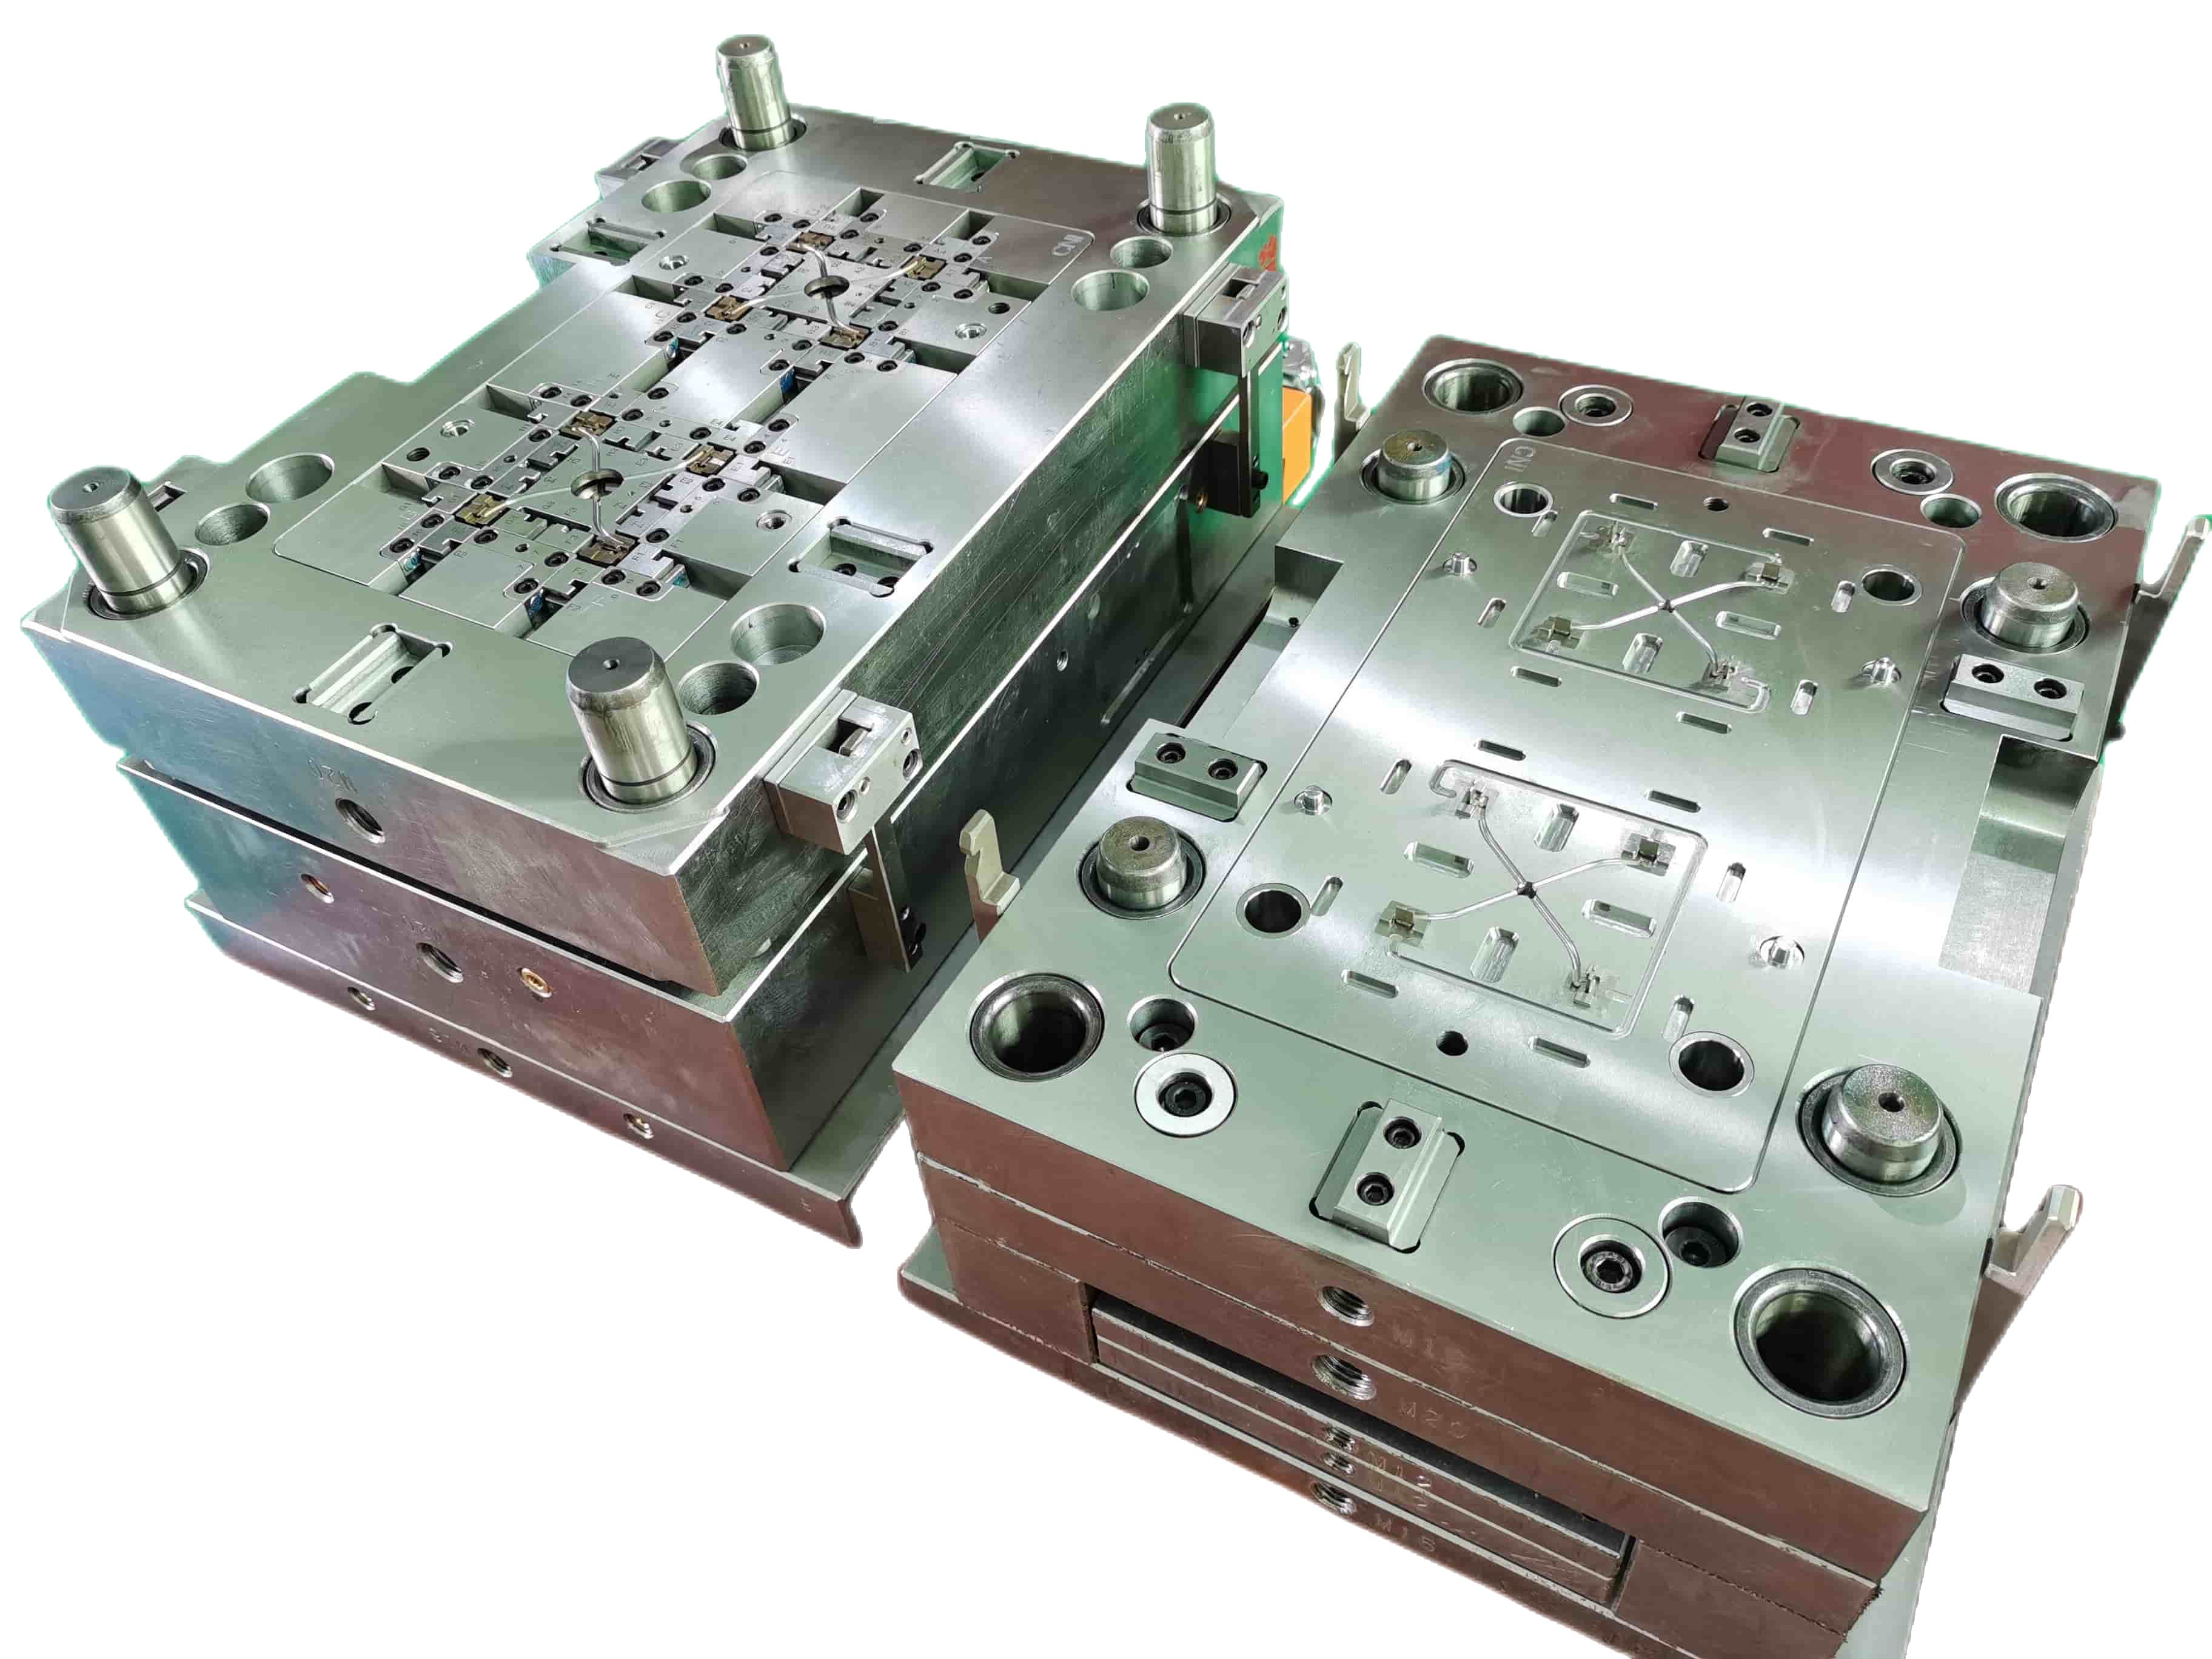 China Plastic Injection Mold Maker, High Precision Plastic Molding